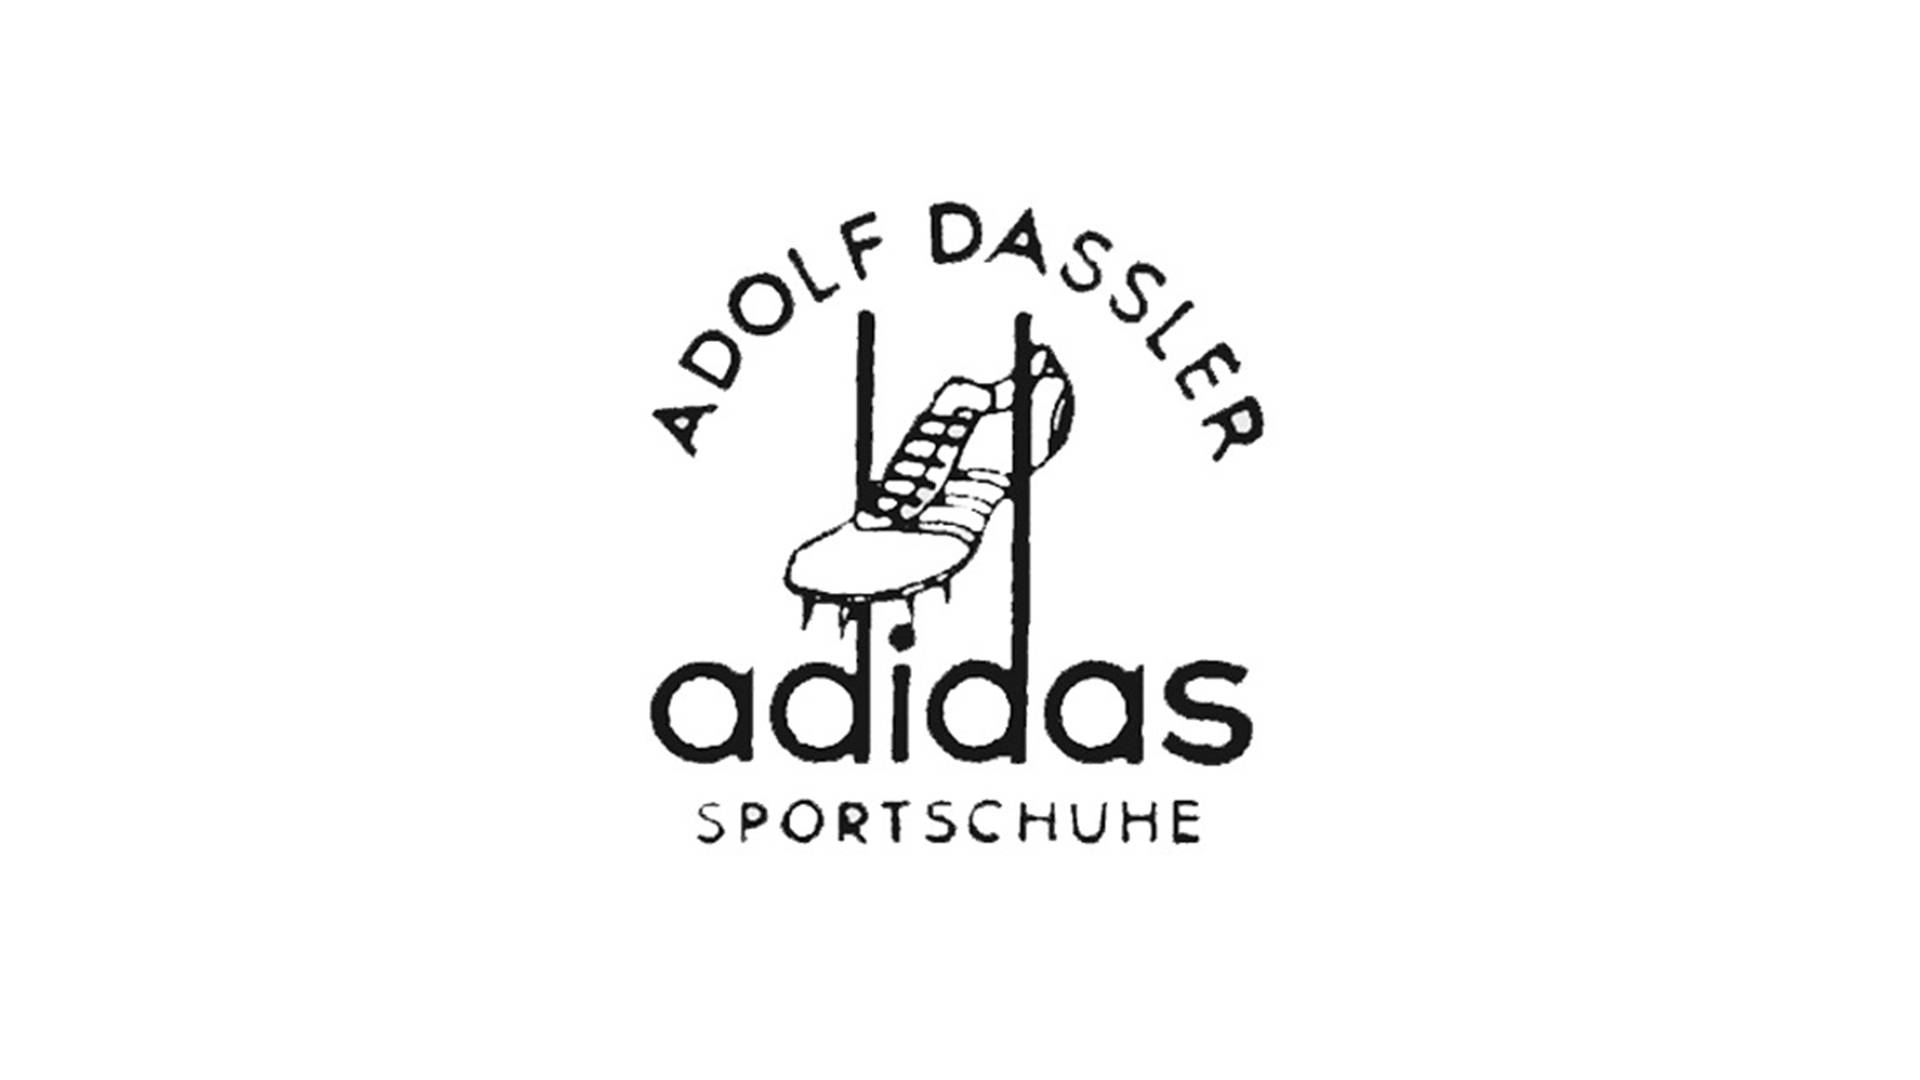 Filth Paragraph Miscellaneous goods The History of adidas: Moments that Made the Brand | The Sole Supplier